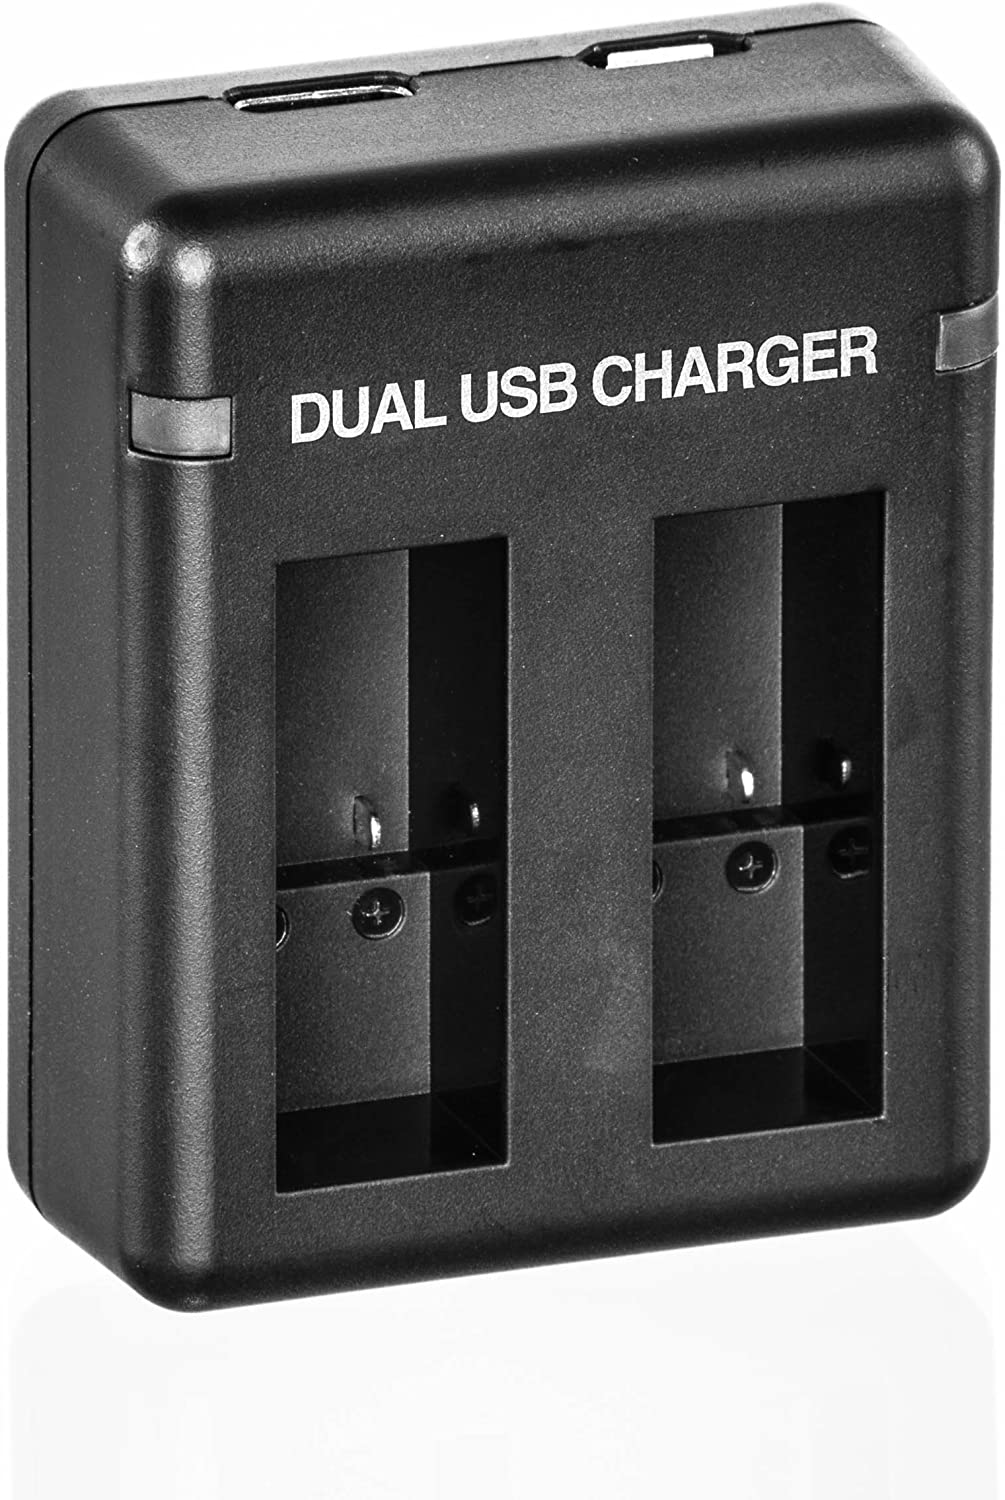 Ultimaxx Dual USB Battery Charger for GoPro Hero 5, 6, 7, 8 Batteries with 2X Extended Life Replacement Batteries (1700mAh / 3.85V / 6.5Wh) for Use with GoPro HERO5, HERO6, HERO7 & HERO8 Action Cams - image 4 of 7